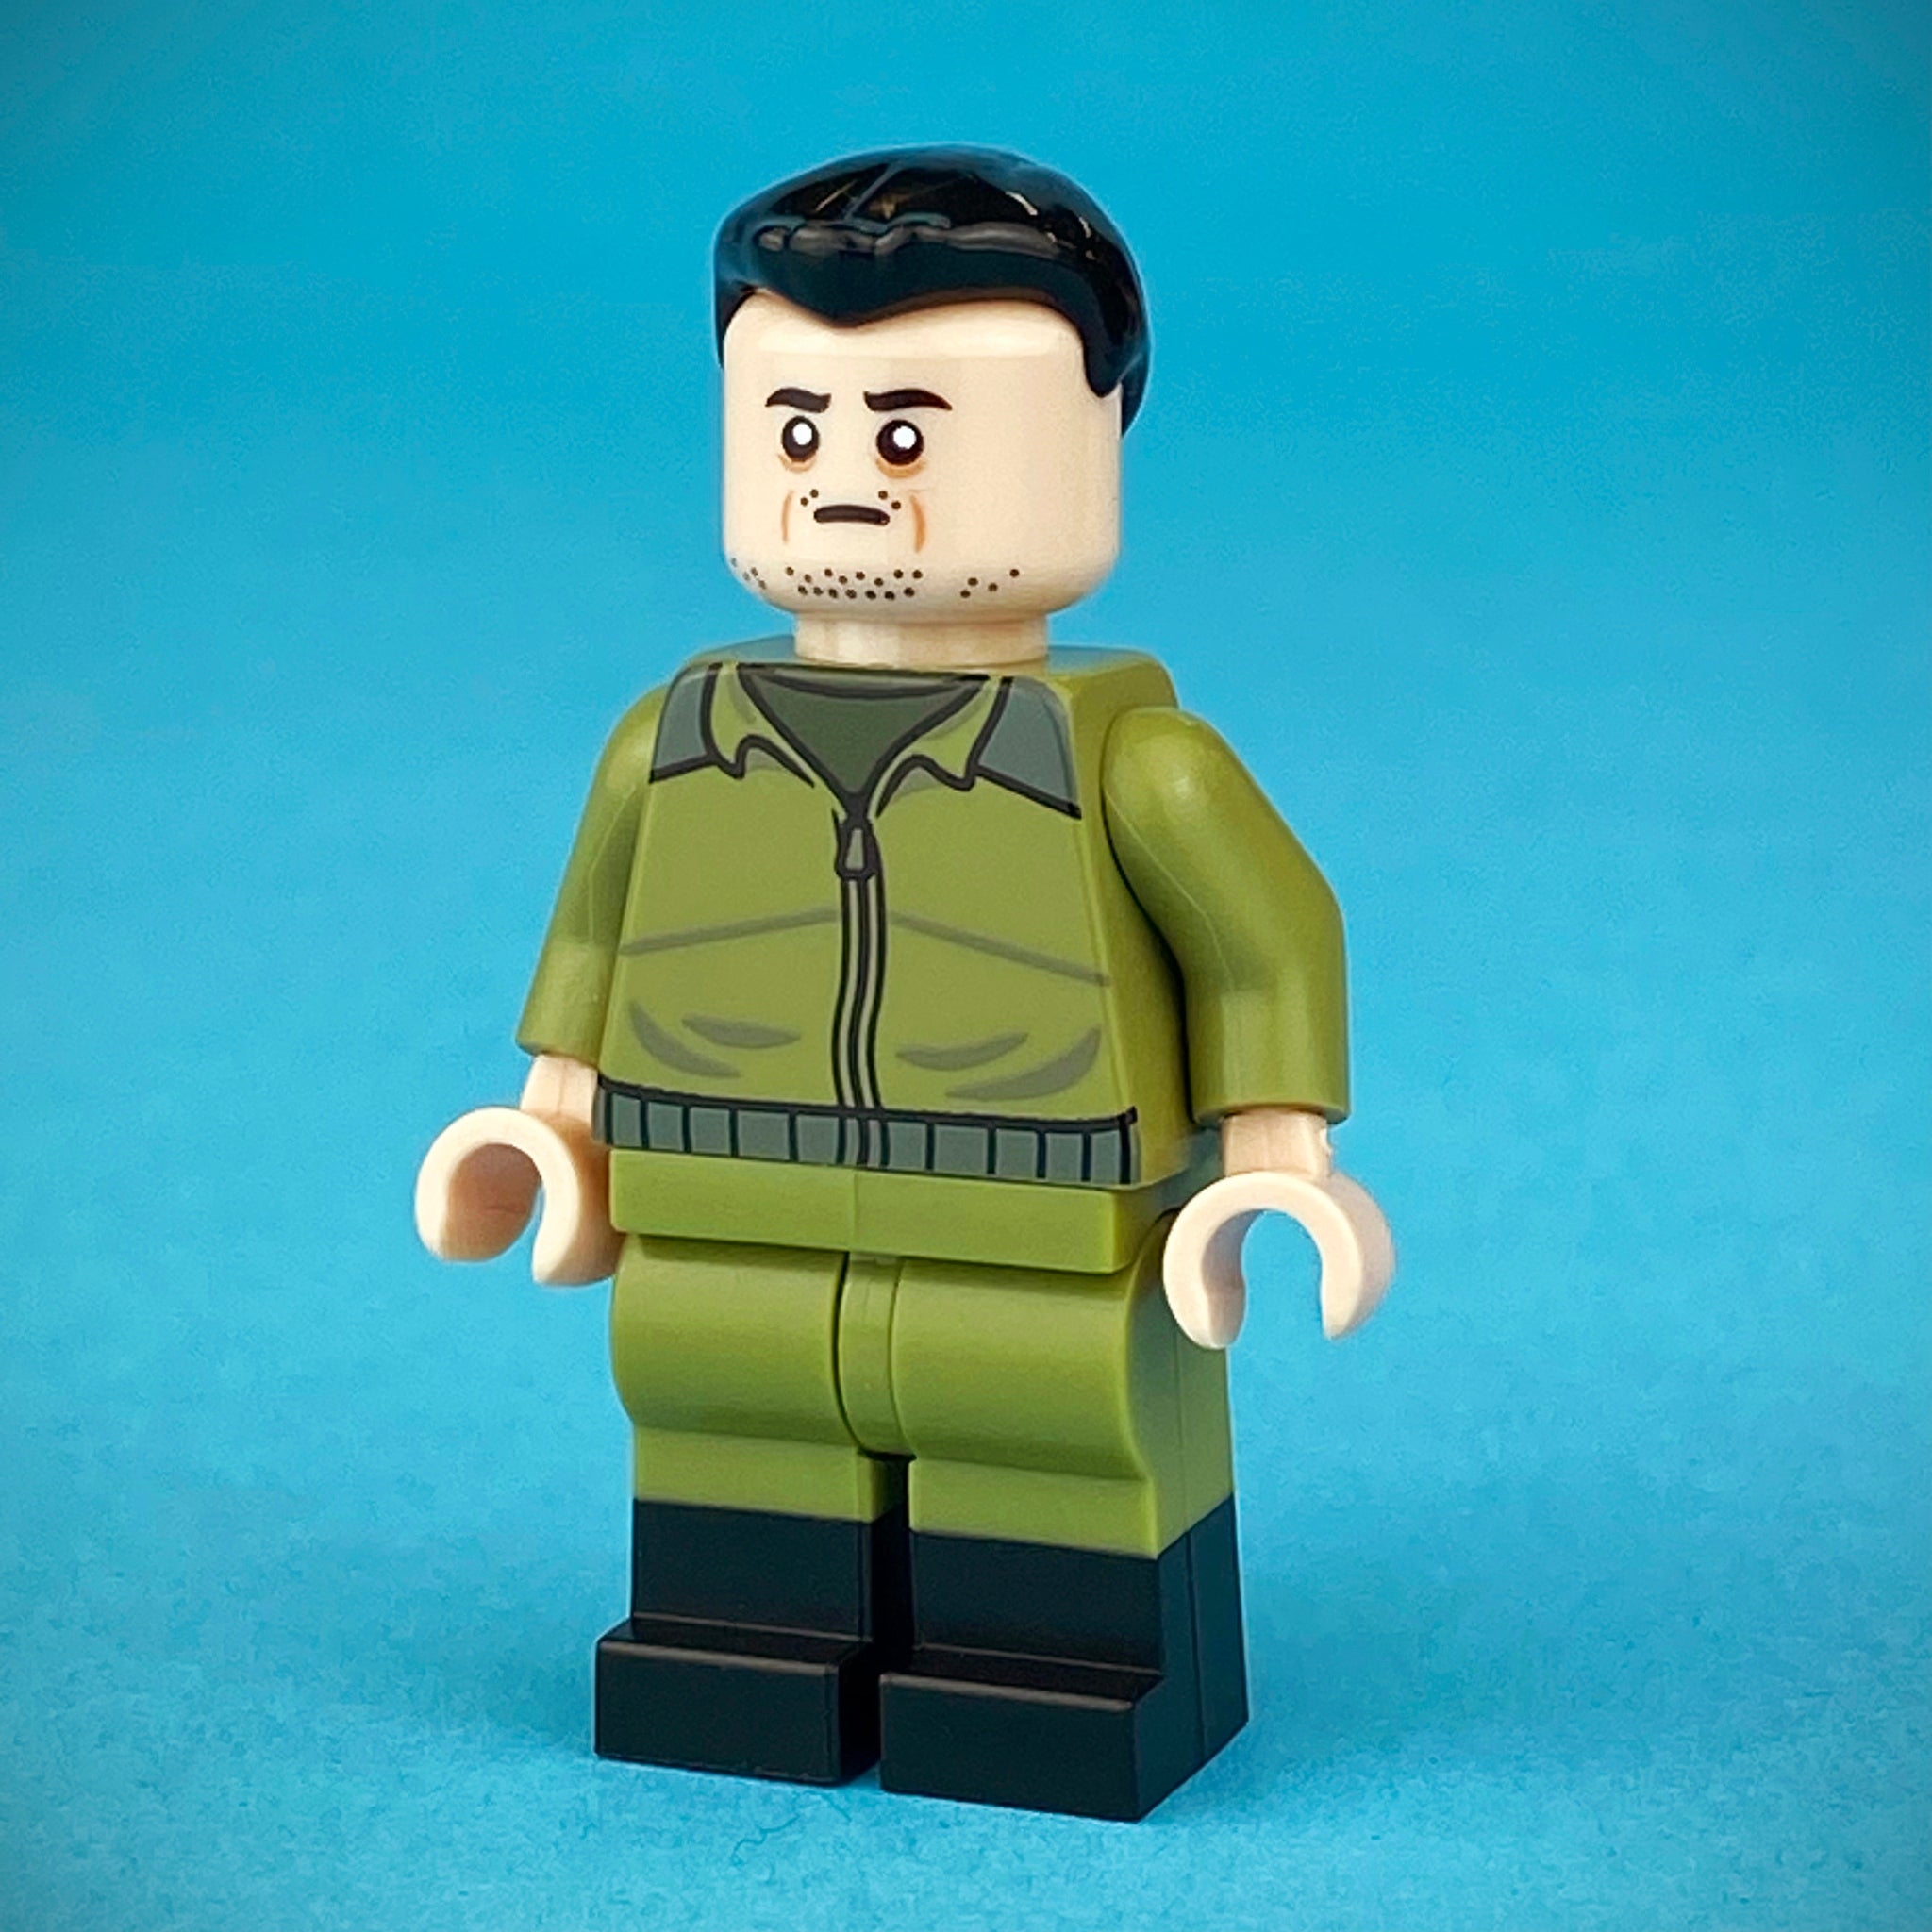 A Chicago artist created a Lego version of Volodymyr Zelensky to raise money for humanitarian efforts